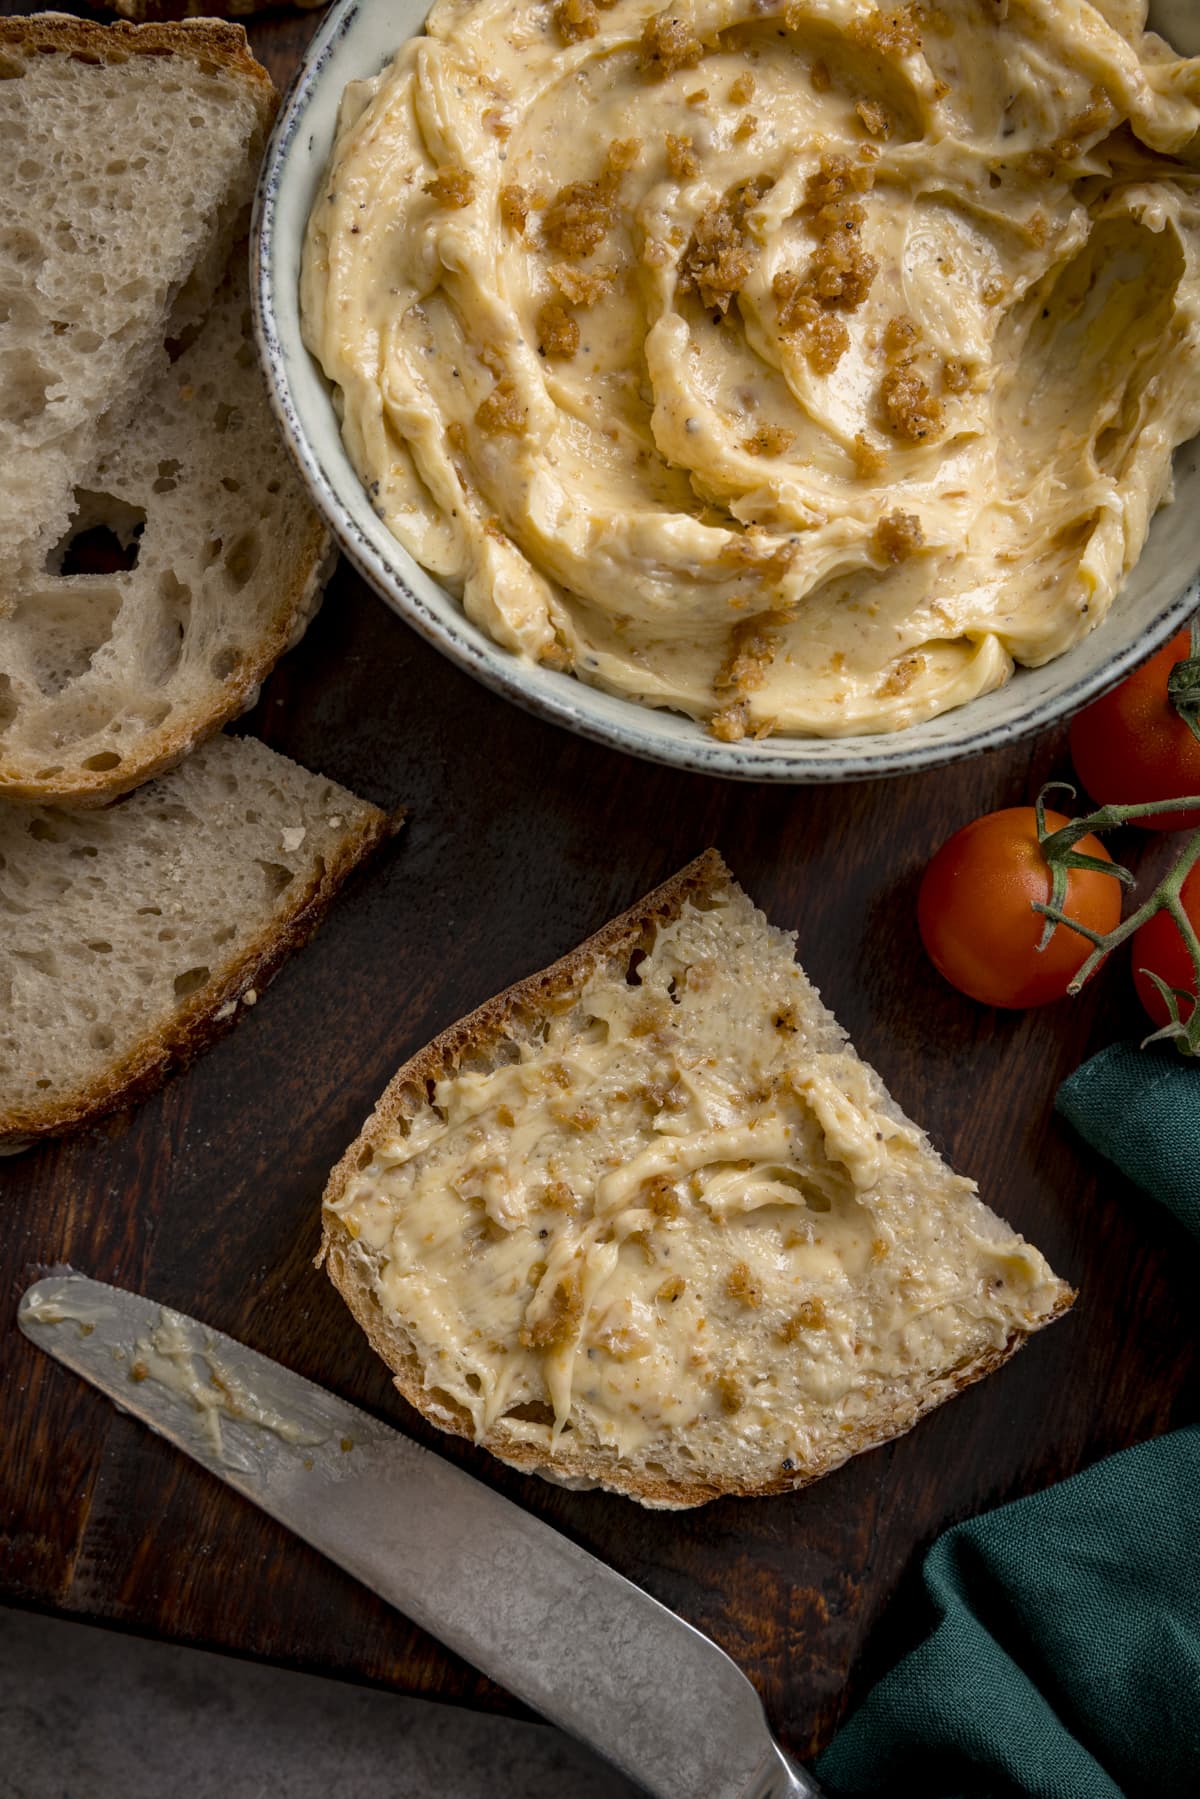 A bowl of chicken skin butter and a piece of bread with the butter spread on it. There is also a knife, a couple of cherry tomatoes and sliced of un-buttered bread scattered around.